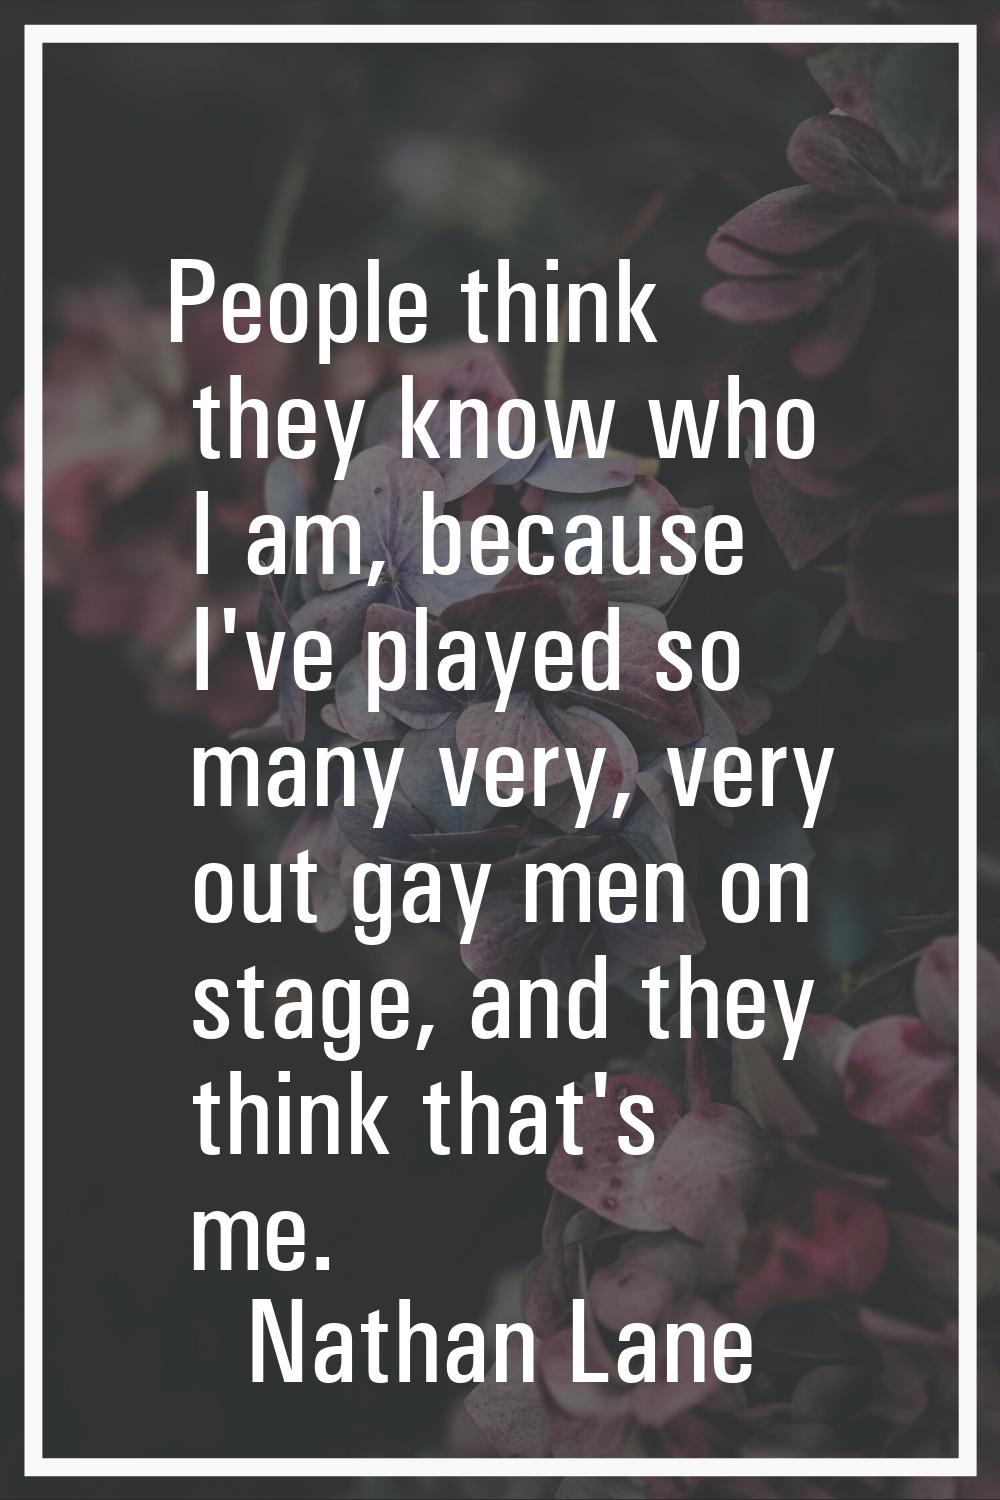 People think they know who I am, because I've played so many very, very out gay men on stage, and t